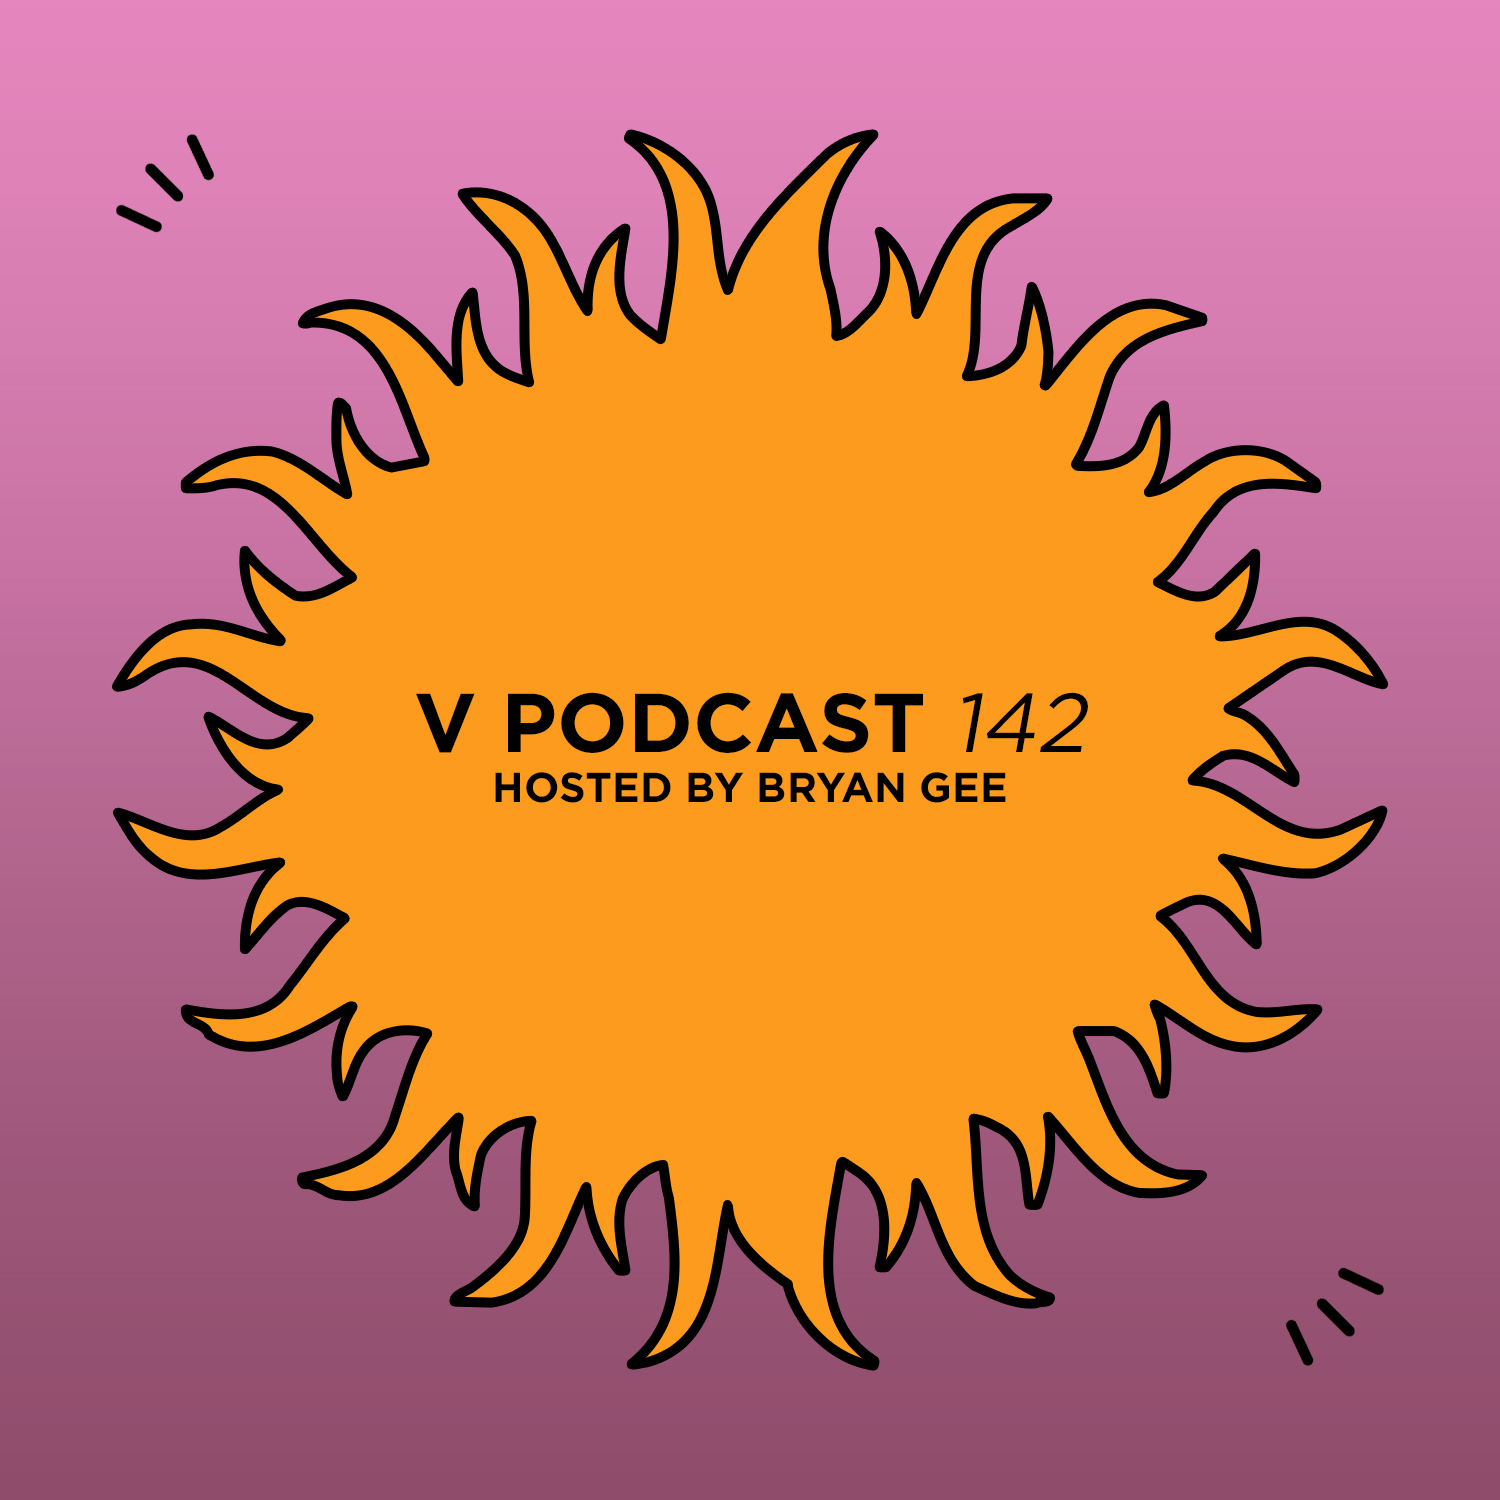 V Podcast 142 - Hosted by Bryan Gee Artwork